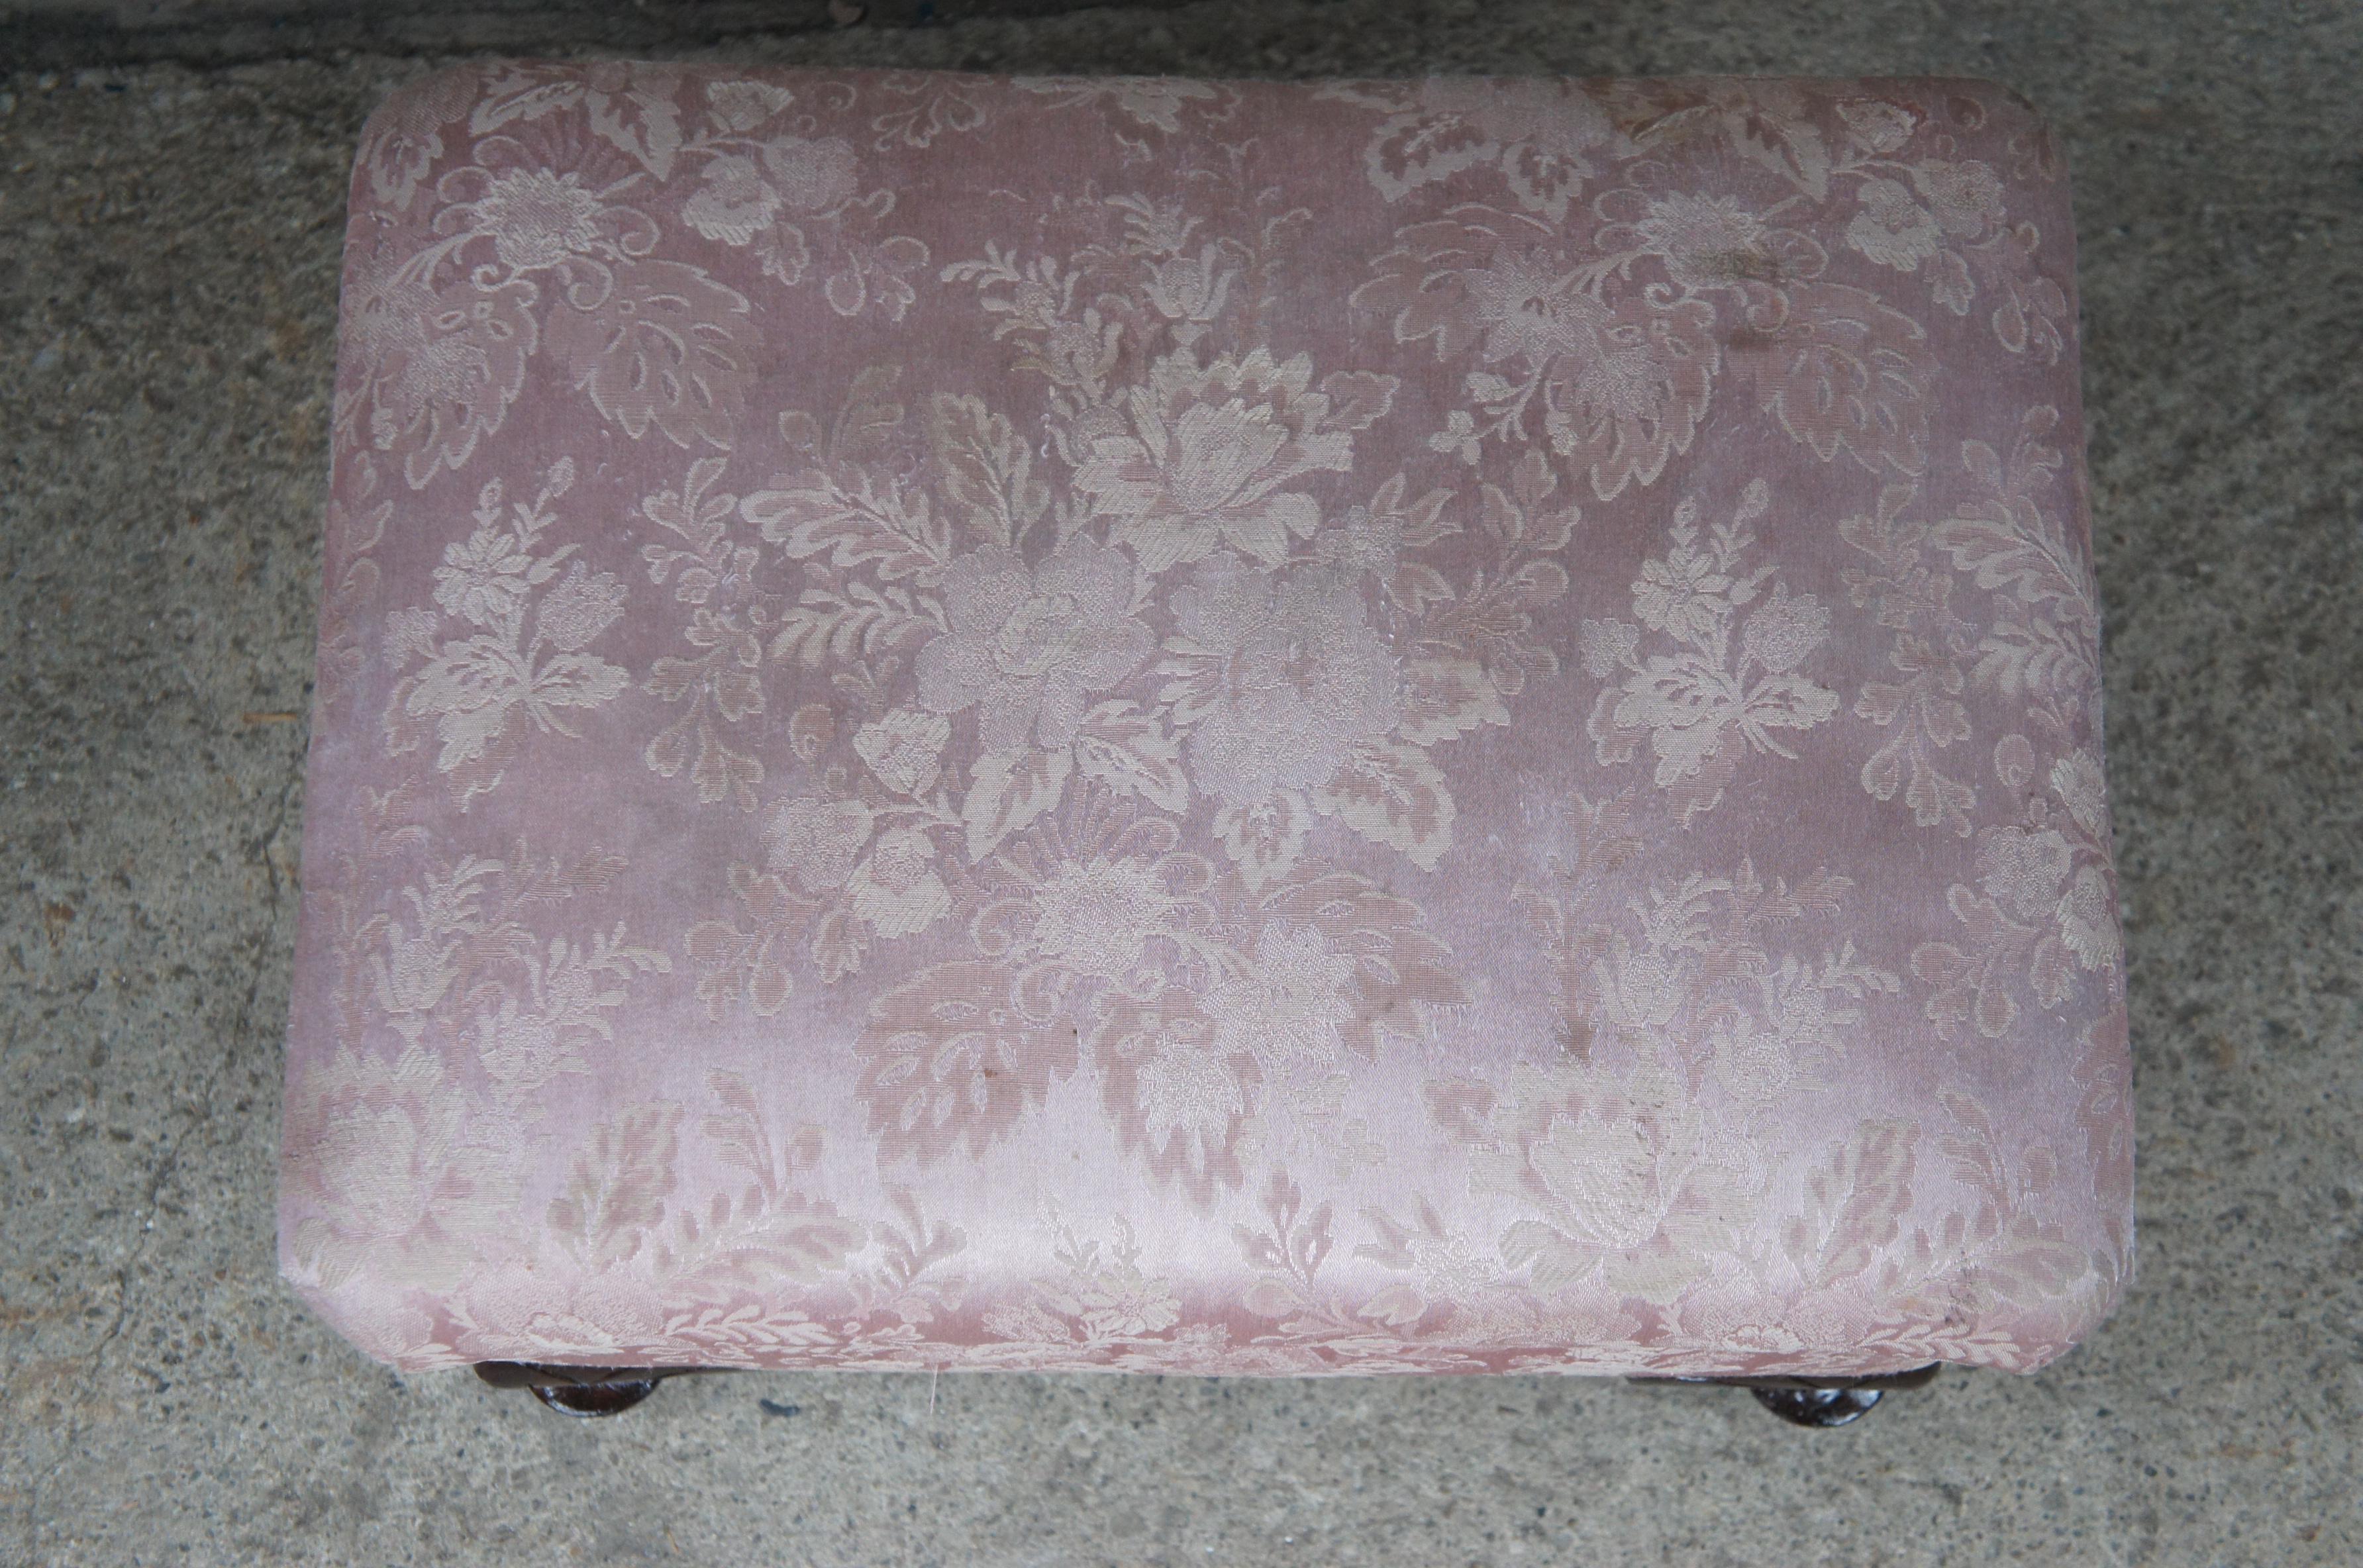 20th Century Vintage Queen Anne Floral Upholstered Walnut Ottoman Foot Stool Vanity Pouf Pink For Sale